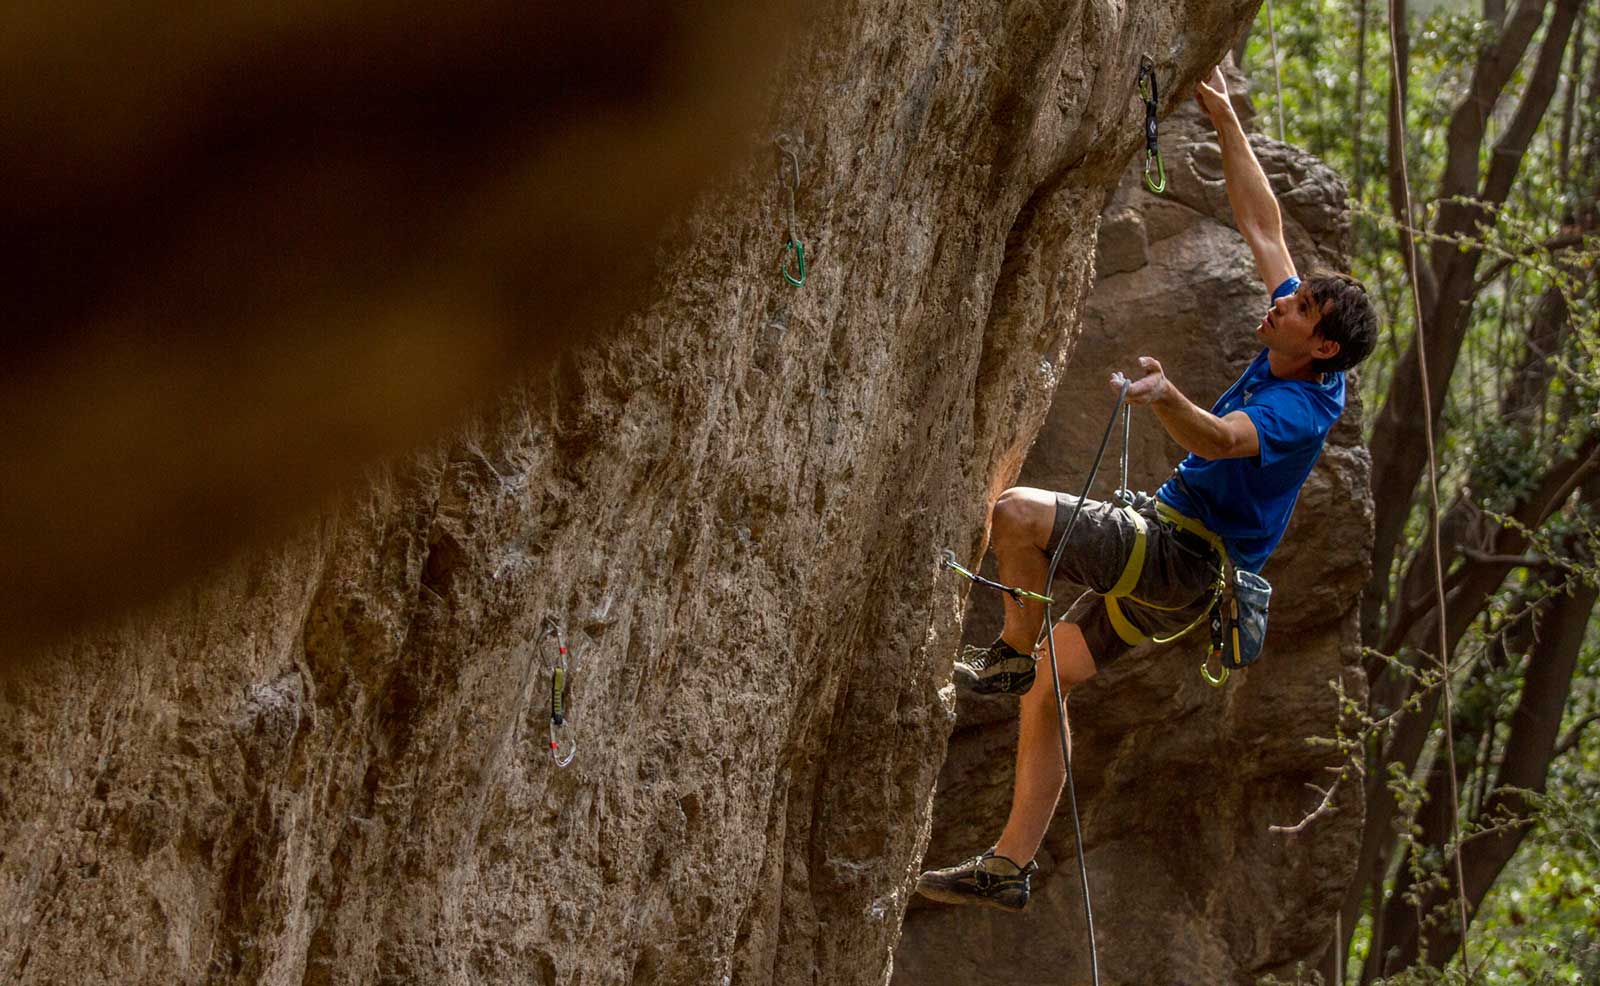 Just a normal day of climbing… with Alex Honnold!